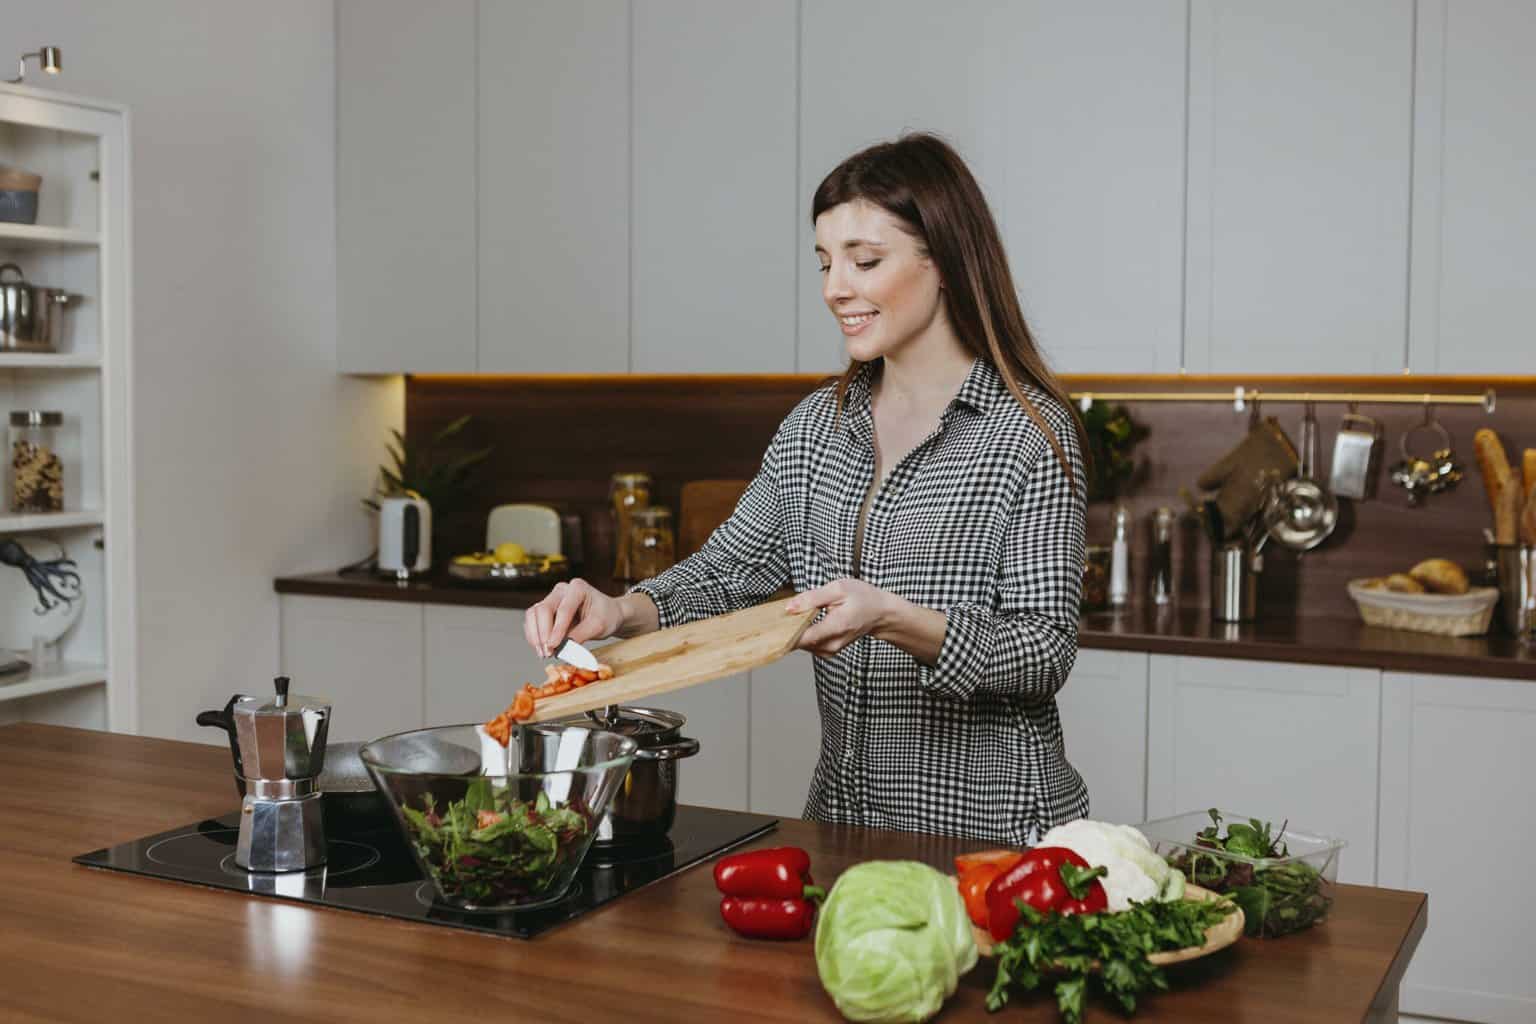 Three Ways to Make Your Home Cooking More Authentic